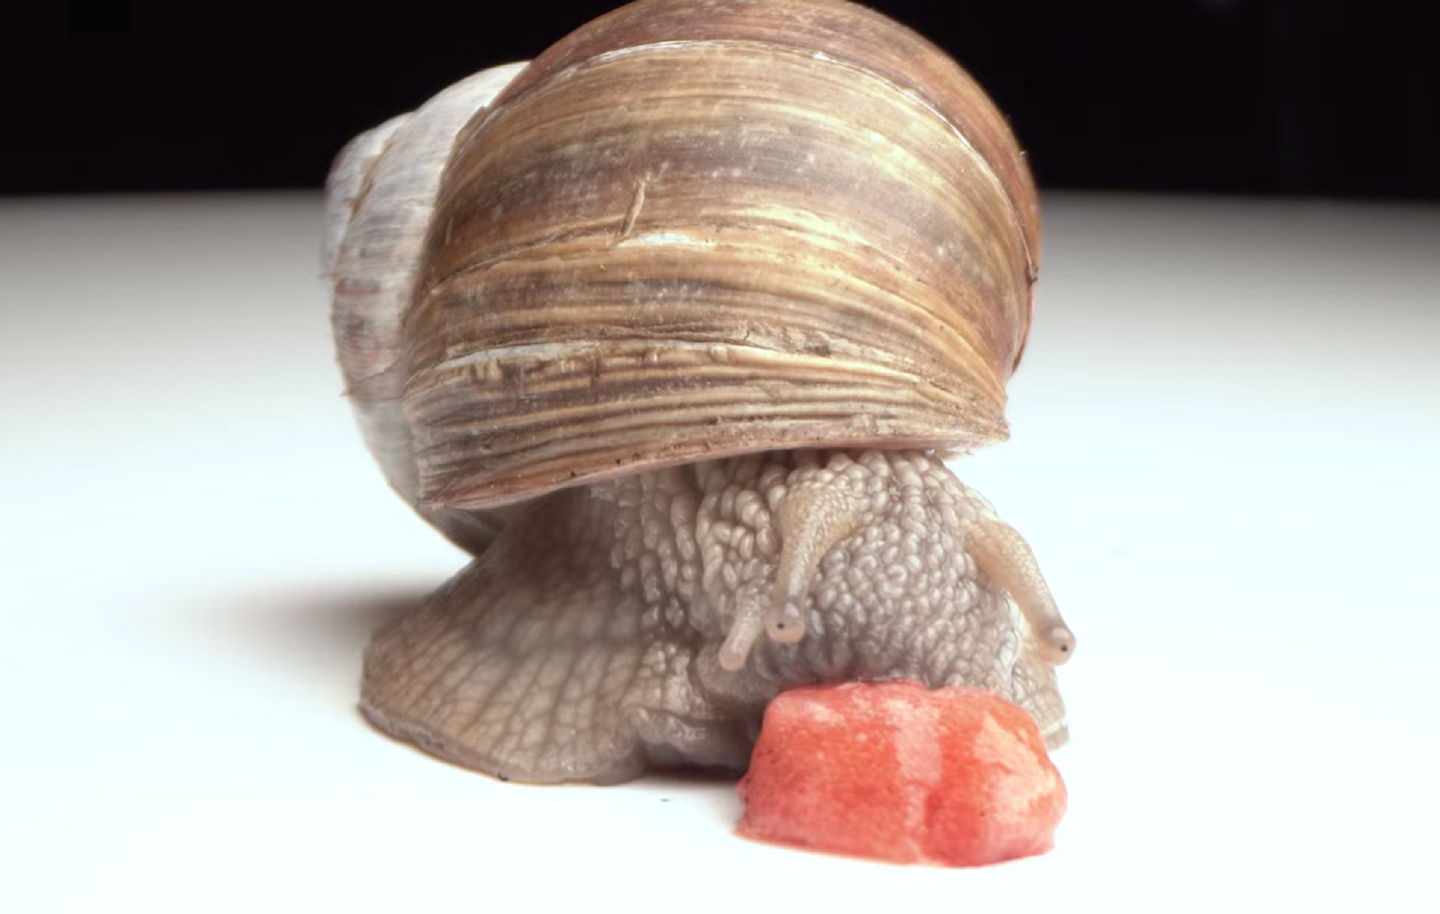 Brown garden snail eating a strawberry on a white table